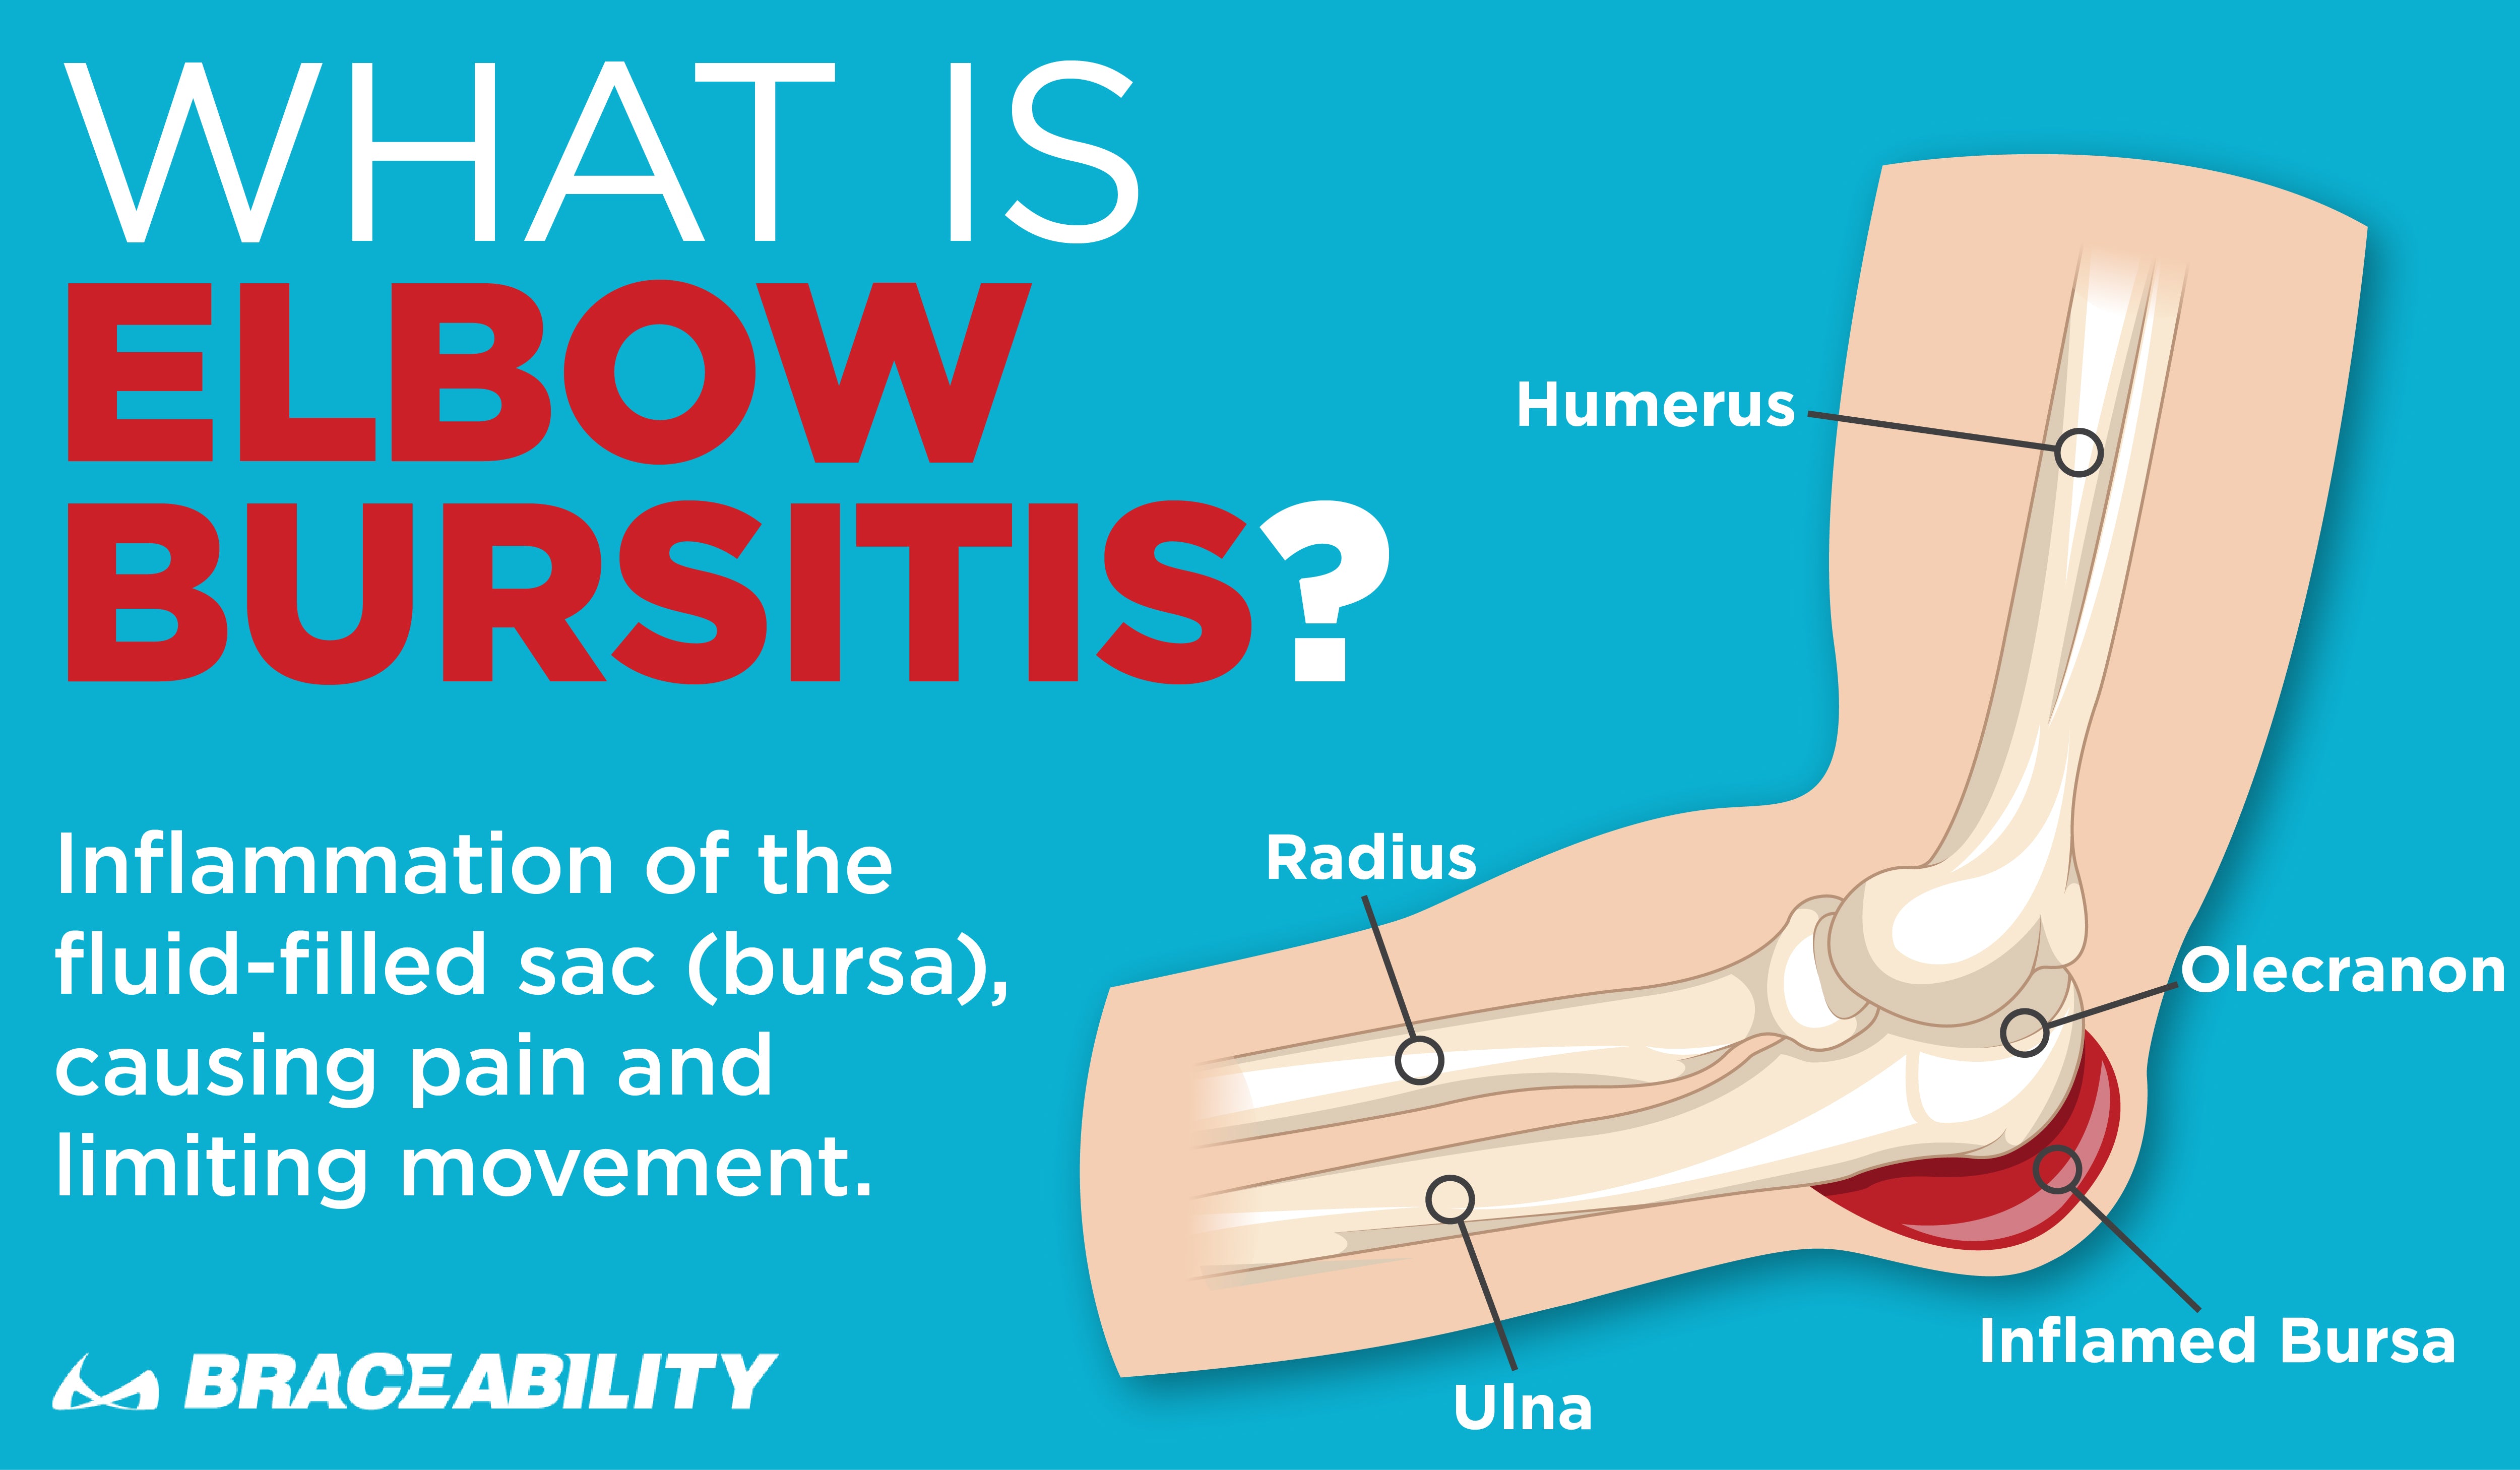 elbow bursitis causes a swollen inflammation on the outside of your elbow causing pain when touched